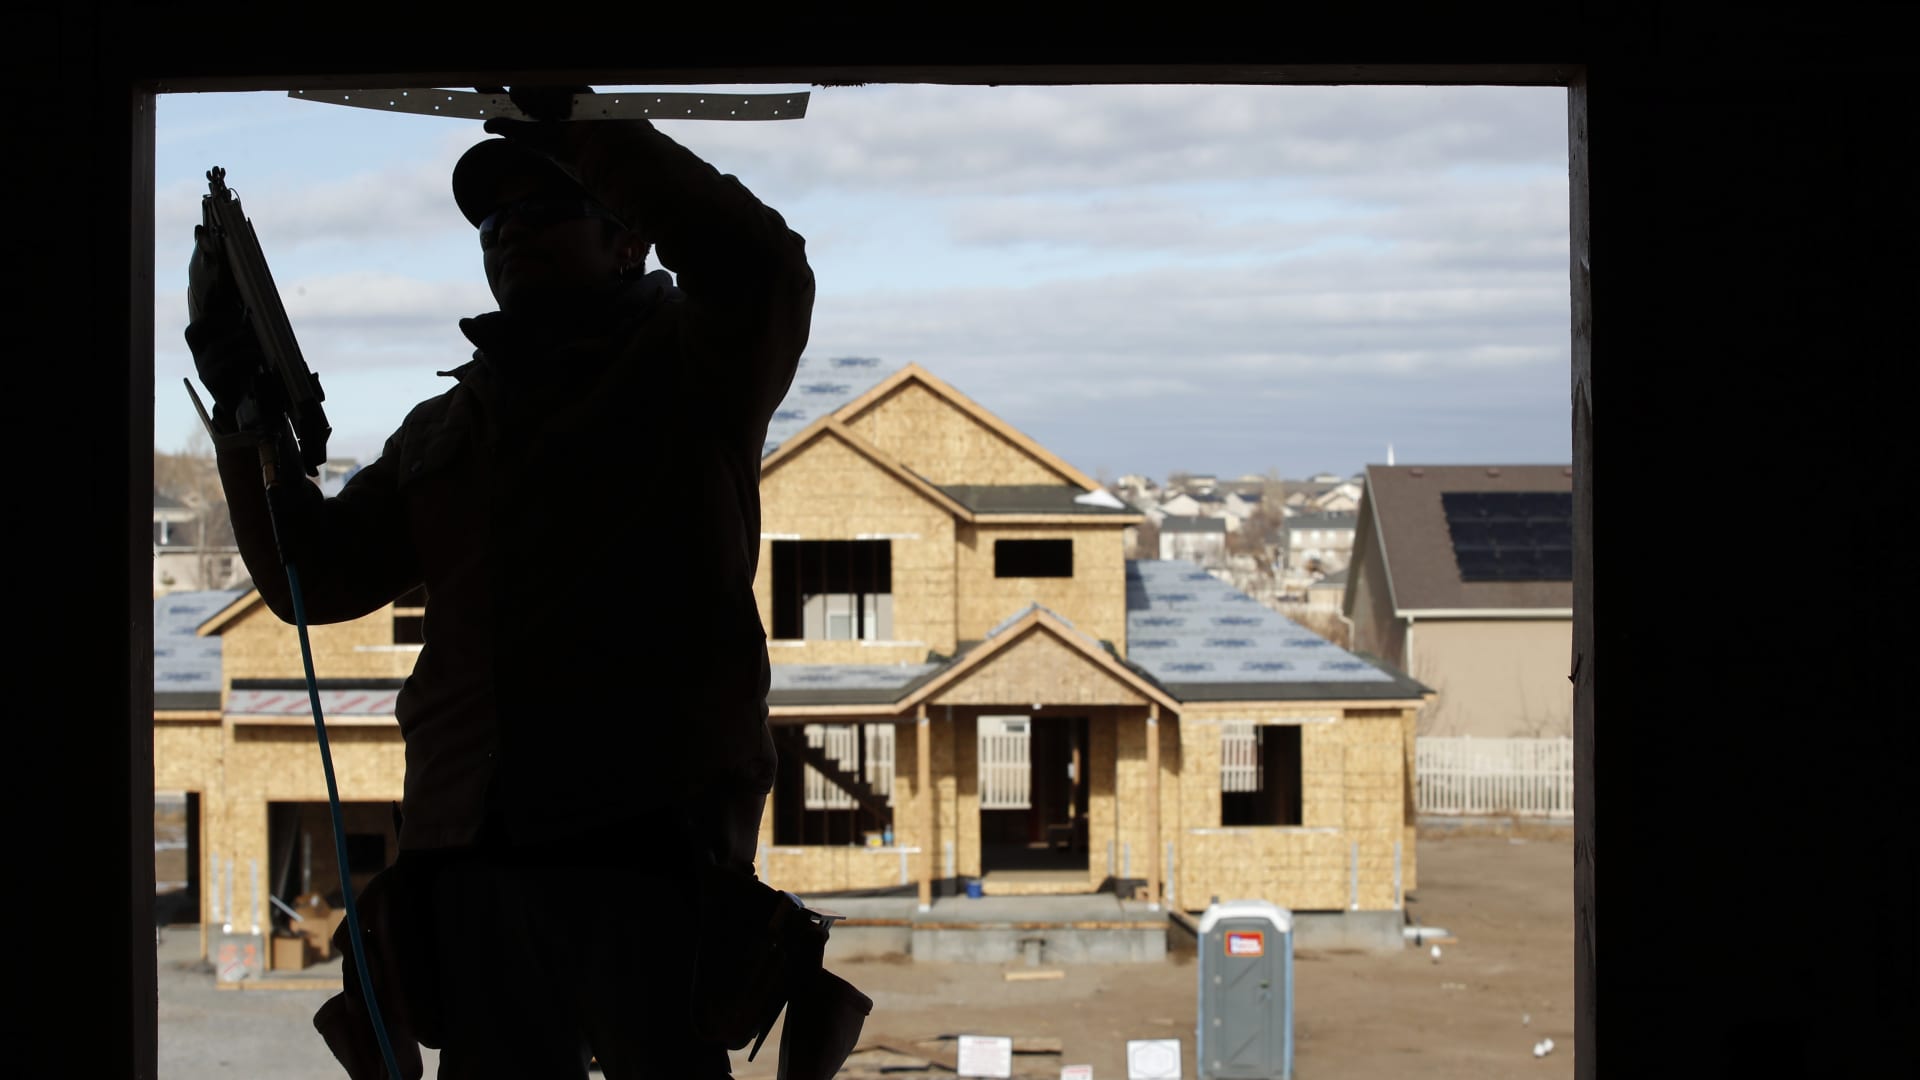 Biden looks to give a big boost to homebuyers and builders